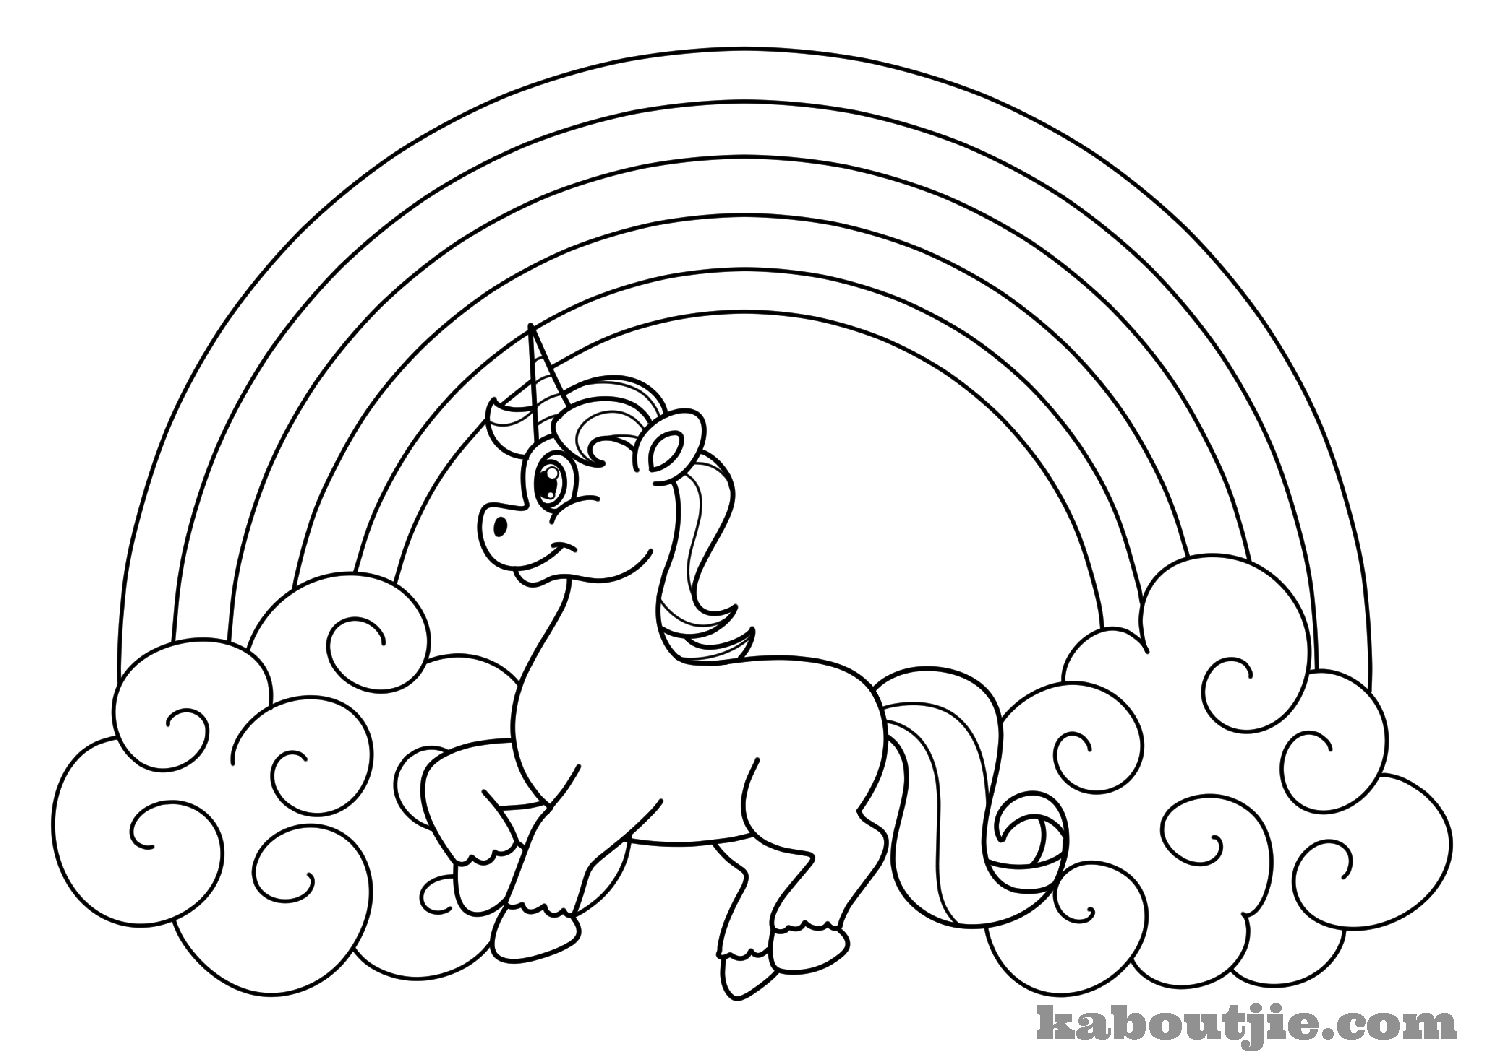 Download Free Printable Unicorn Coloring Pages Pdf - Coloring wall